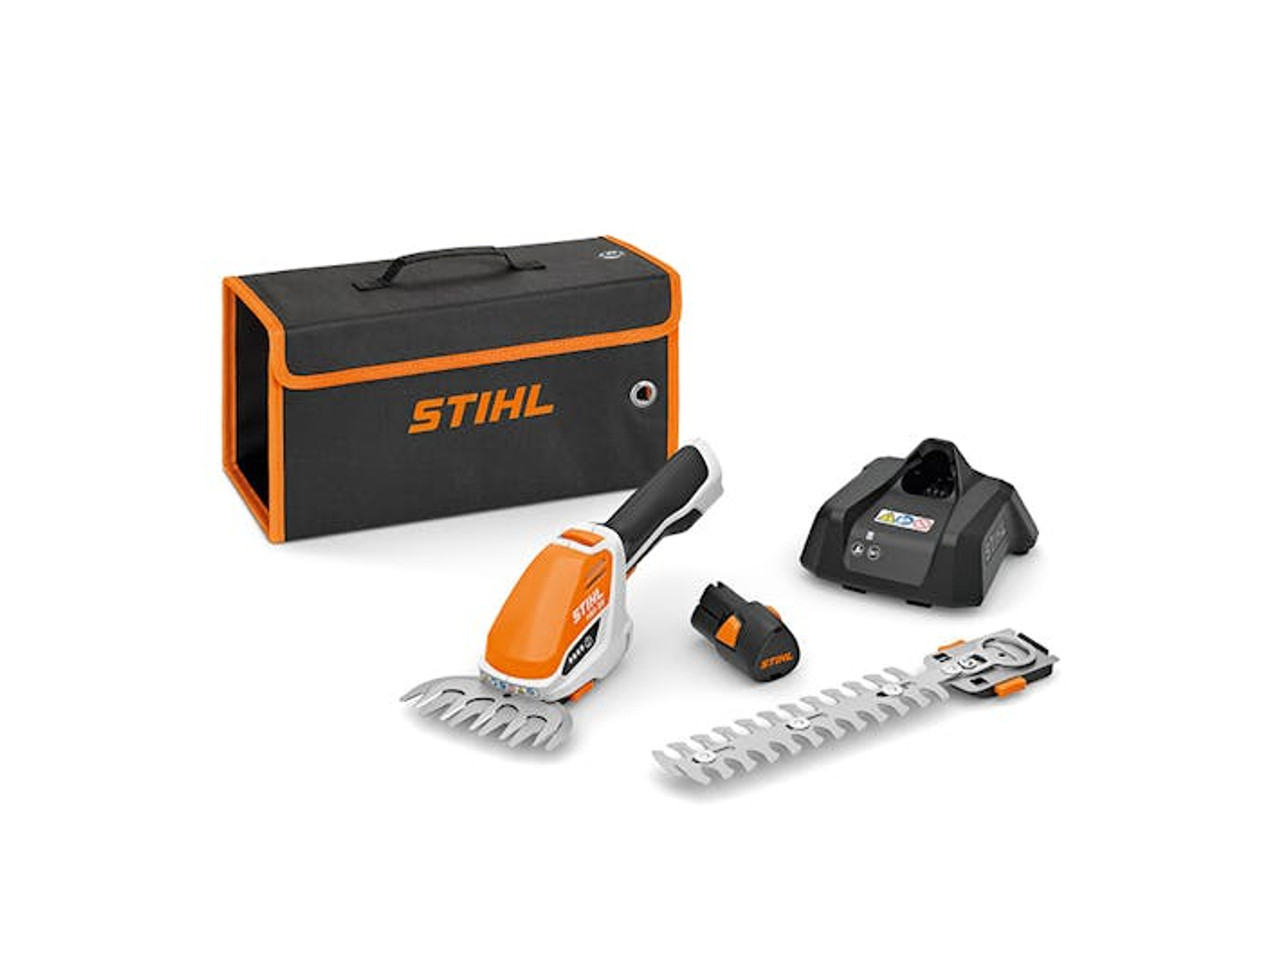 STIHL BATTERY HAND TOOL HSA 26 (UNIT ONLY)